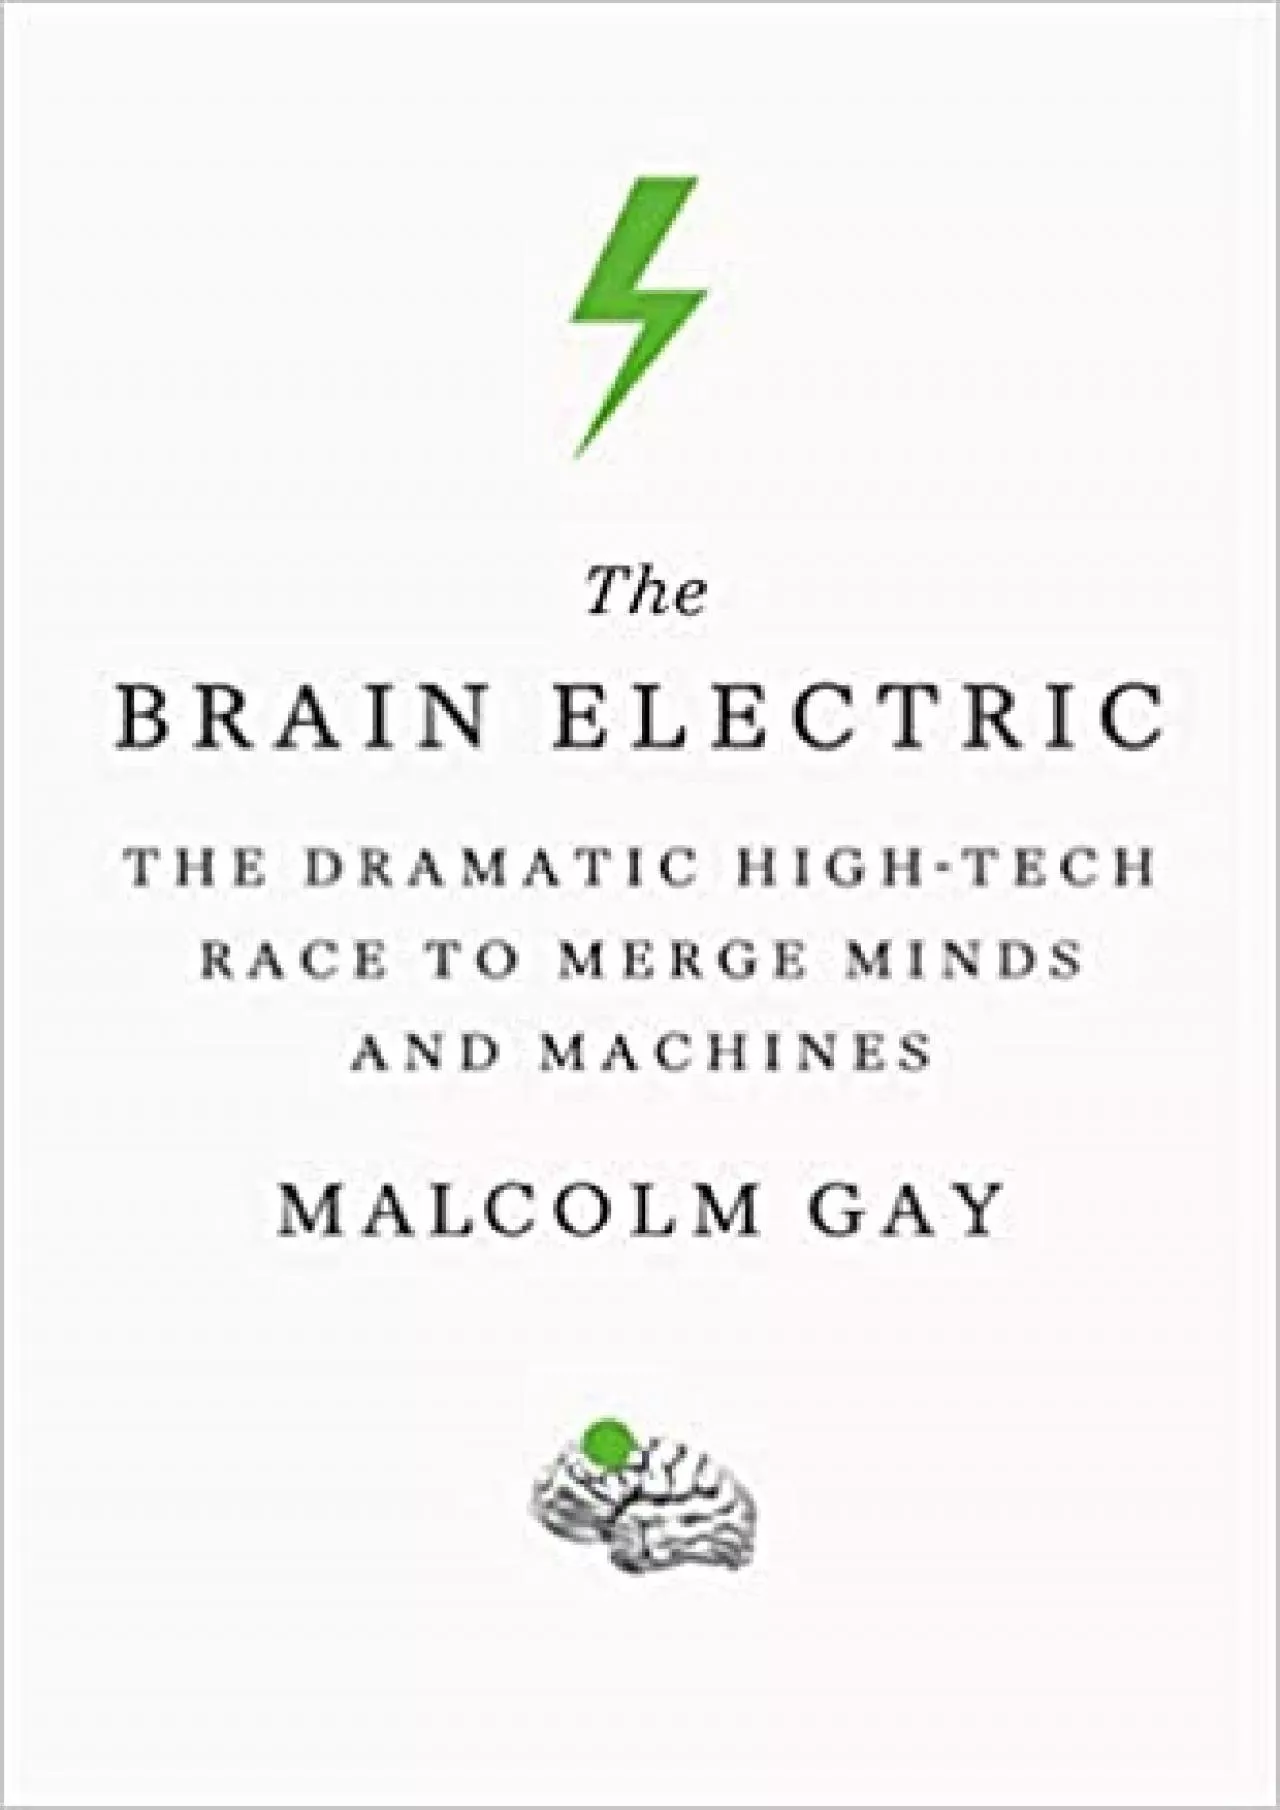 (EBOOK)-The Brain Electric The Dramatic High-Tech Race to Merge Minds and Machines